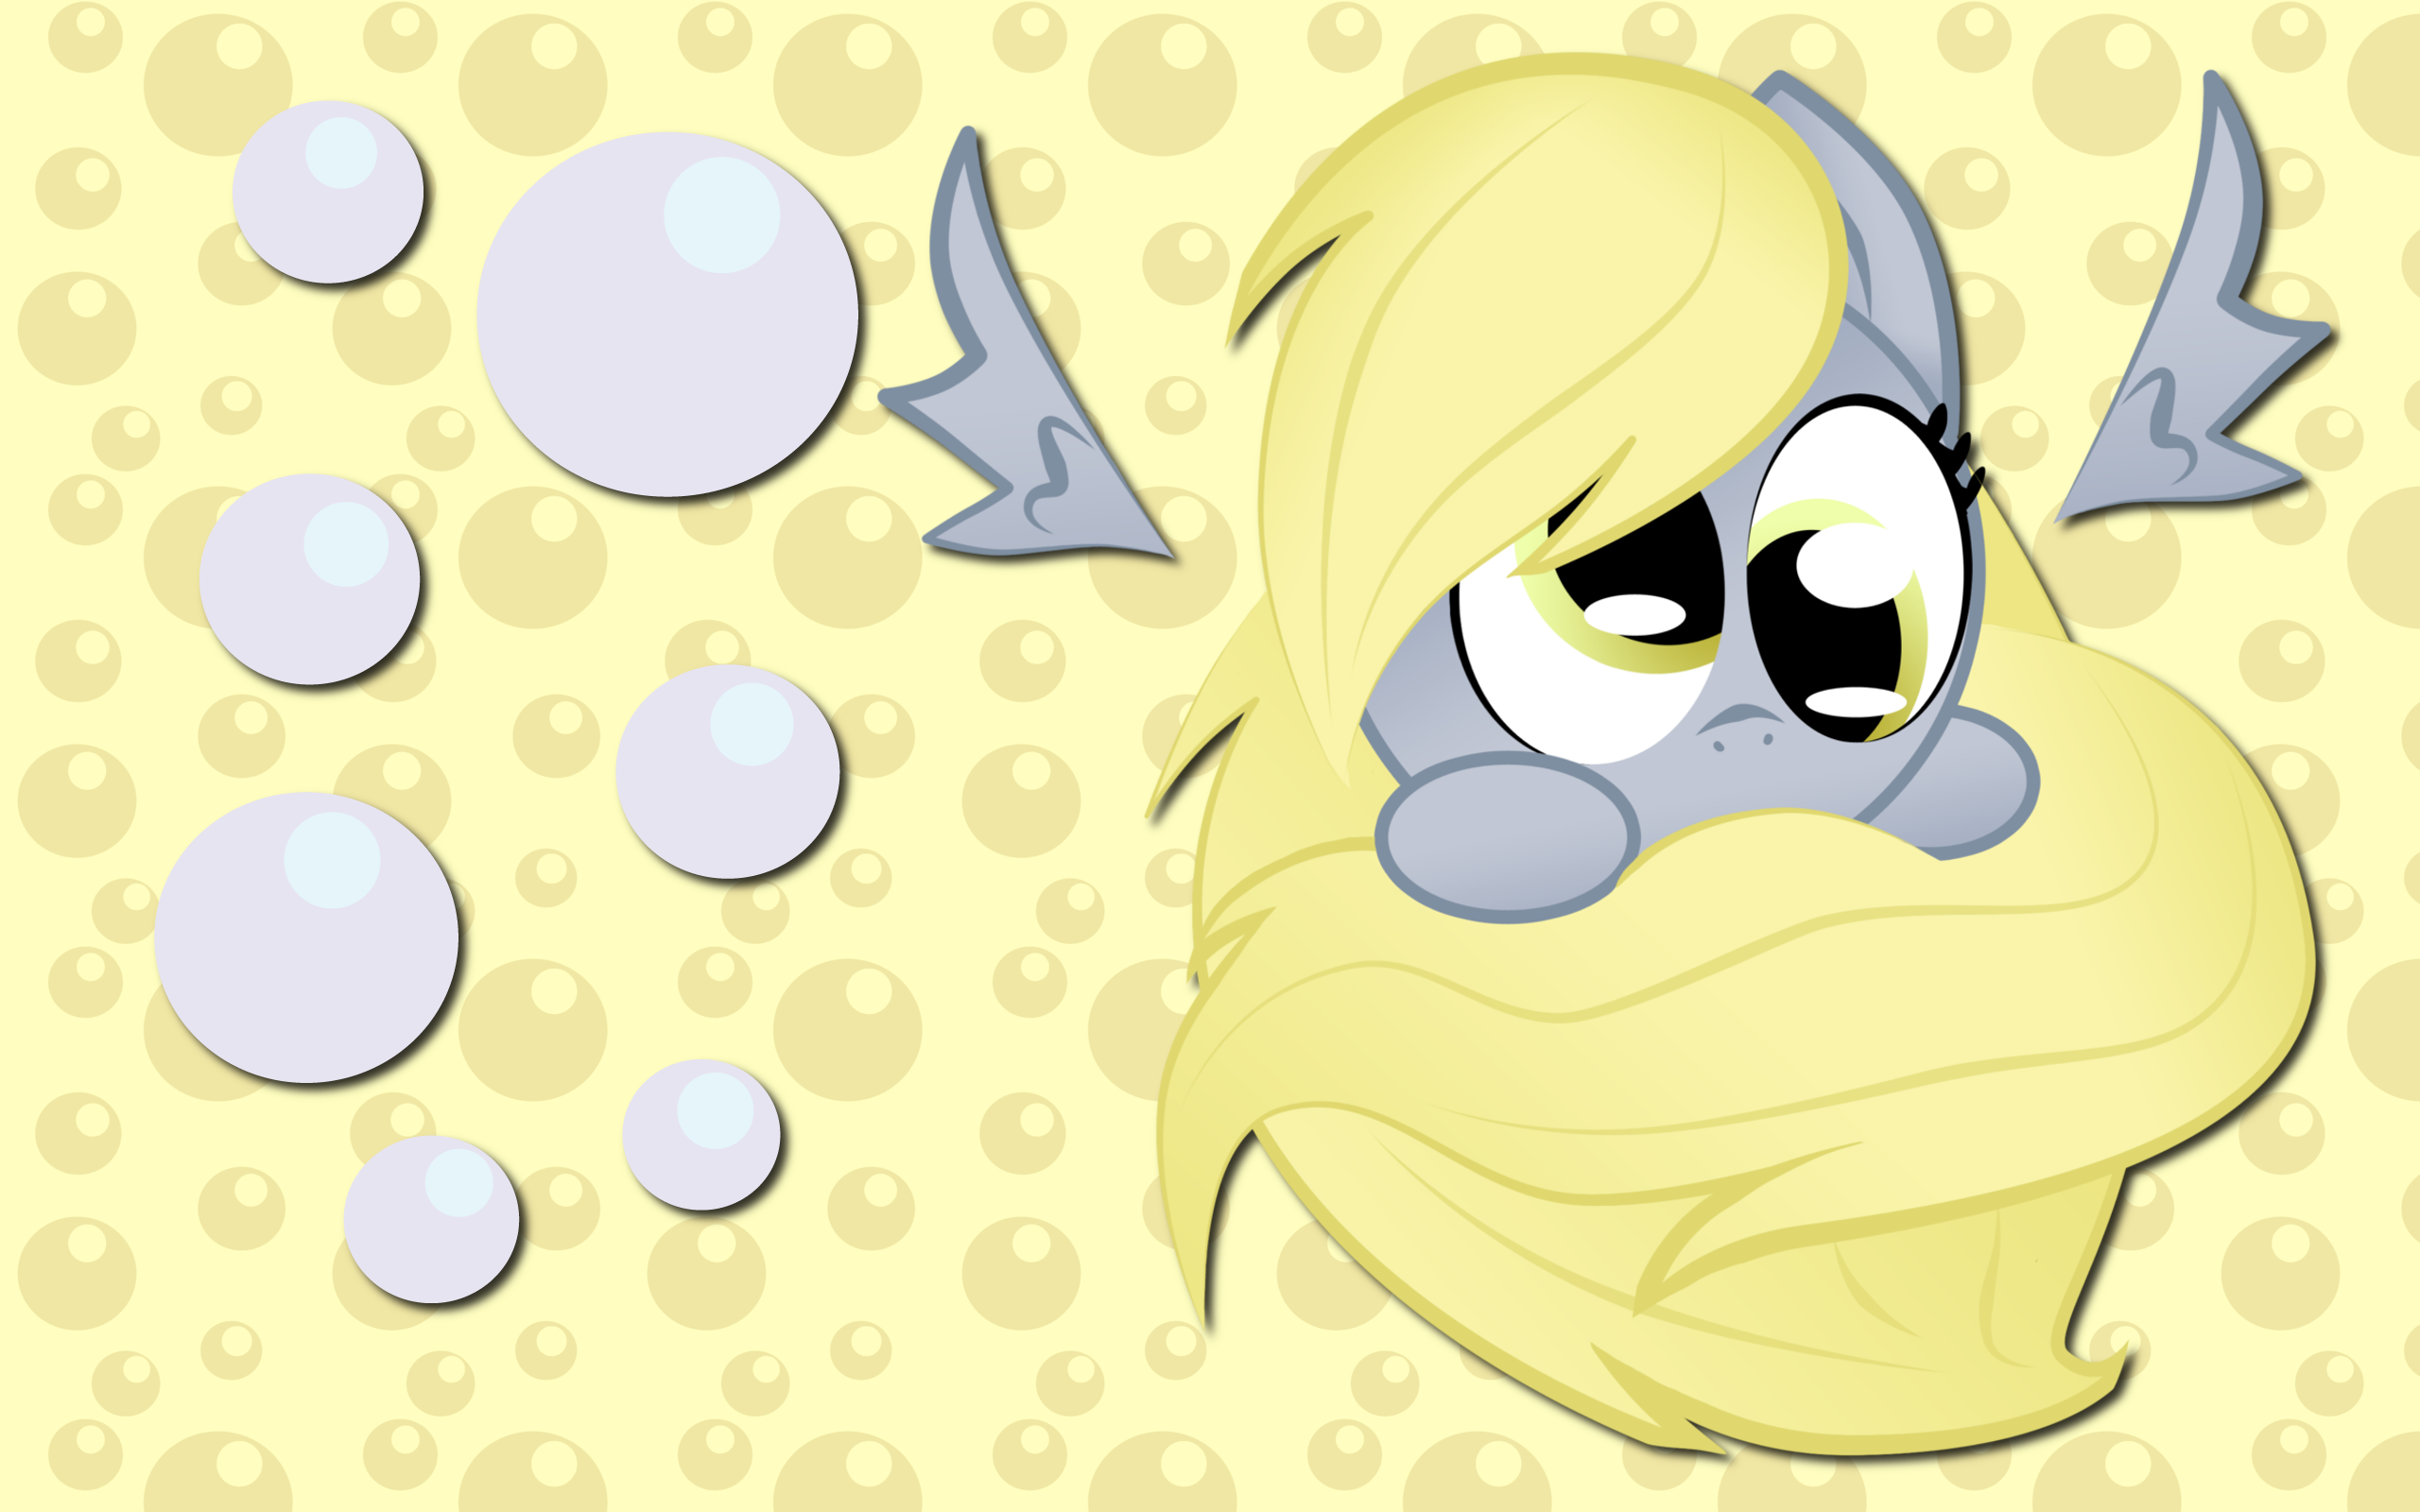 Derpy Hooves Sphere WP by AliceHumanSacrifice0, ooklah and Zackira